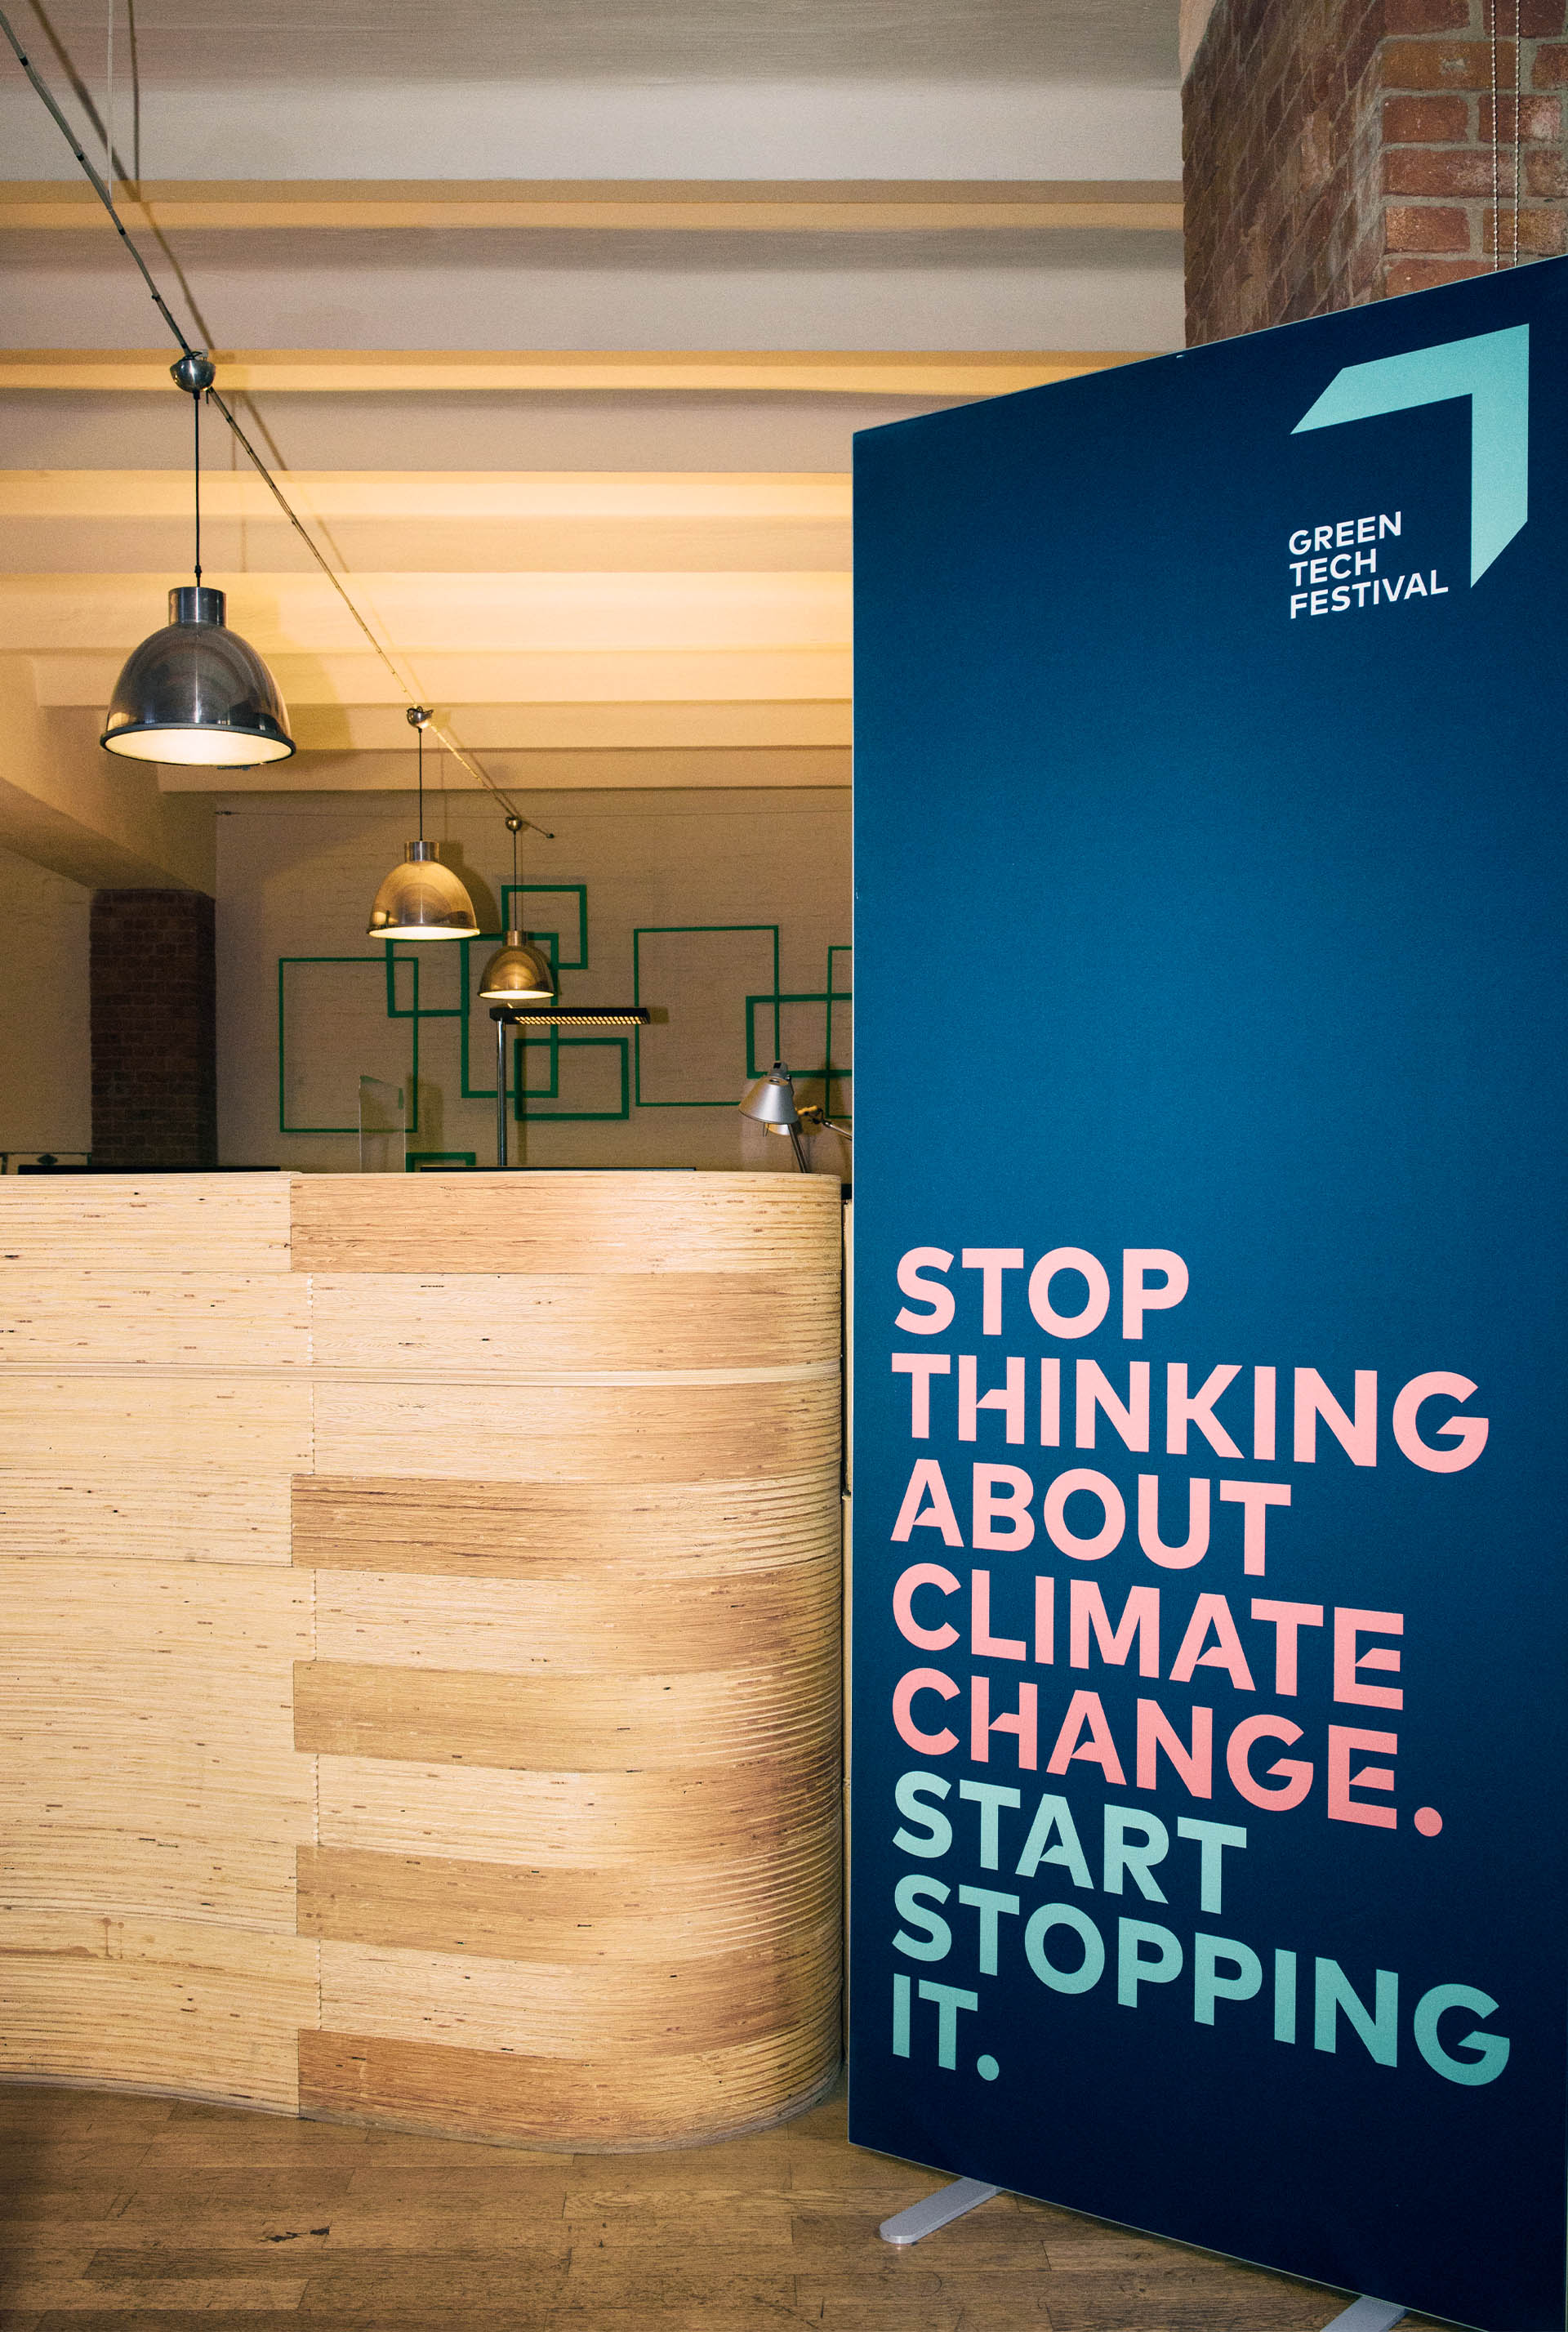 Een display met de tekst “Stop thinking about climate change. Start stopping it.”